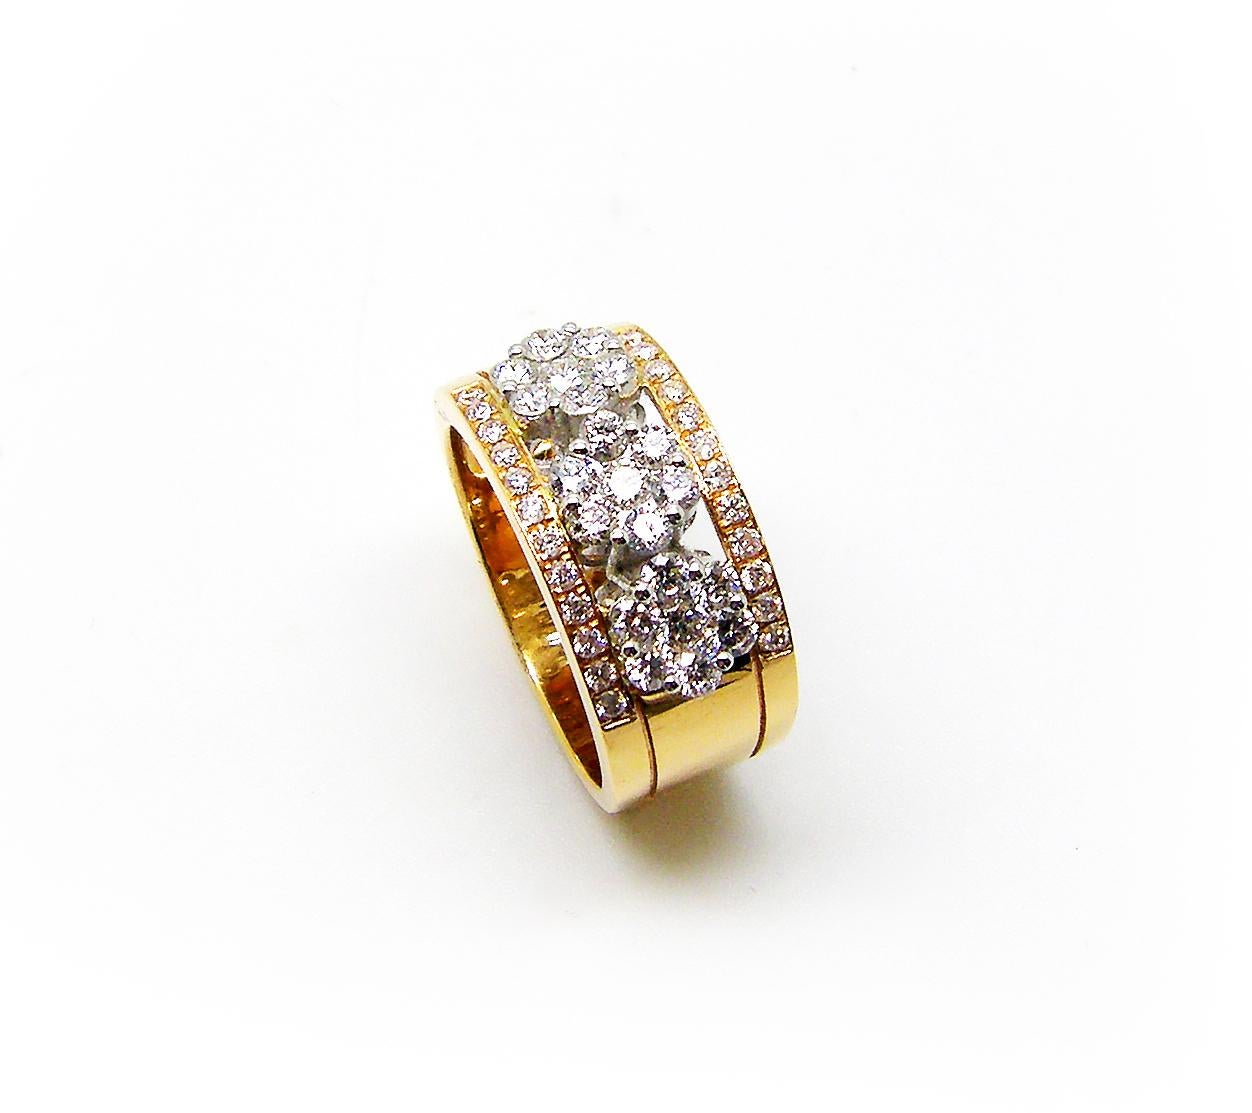 S.Georgios designer 18 Karat Yellow Gold Two-Tone Diamond Band Ring is all handmade and has three white gold diamond flowers in the center. The gorgeous band features brilliant cut white diamonds total weight of 1.00 Carat in a microscopic